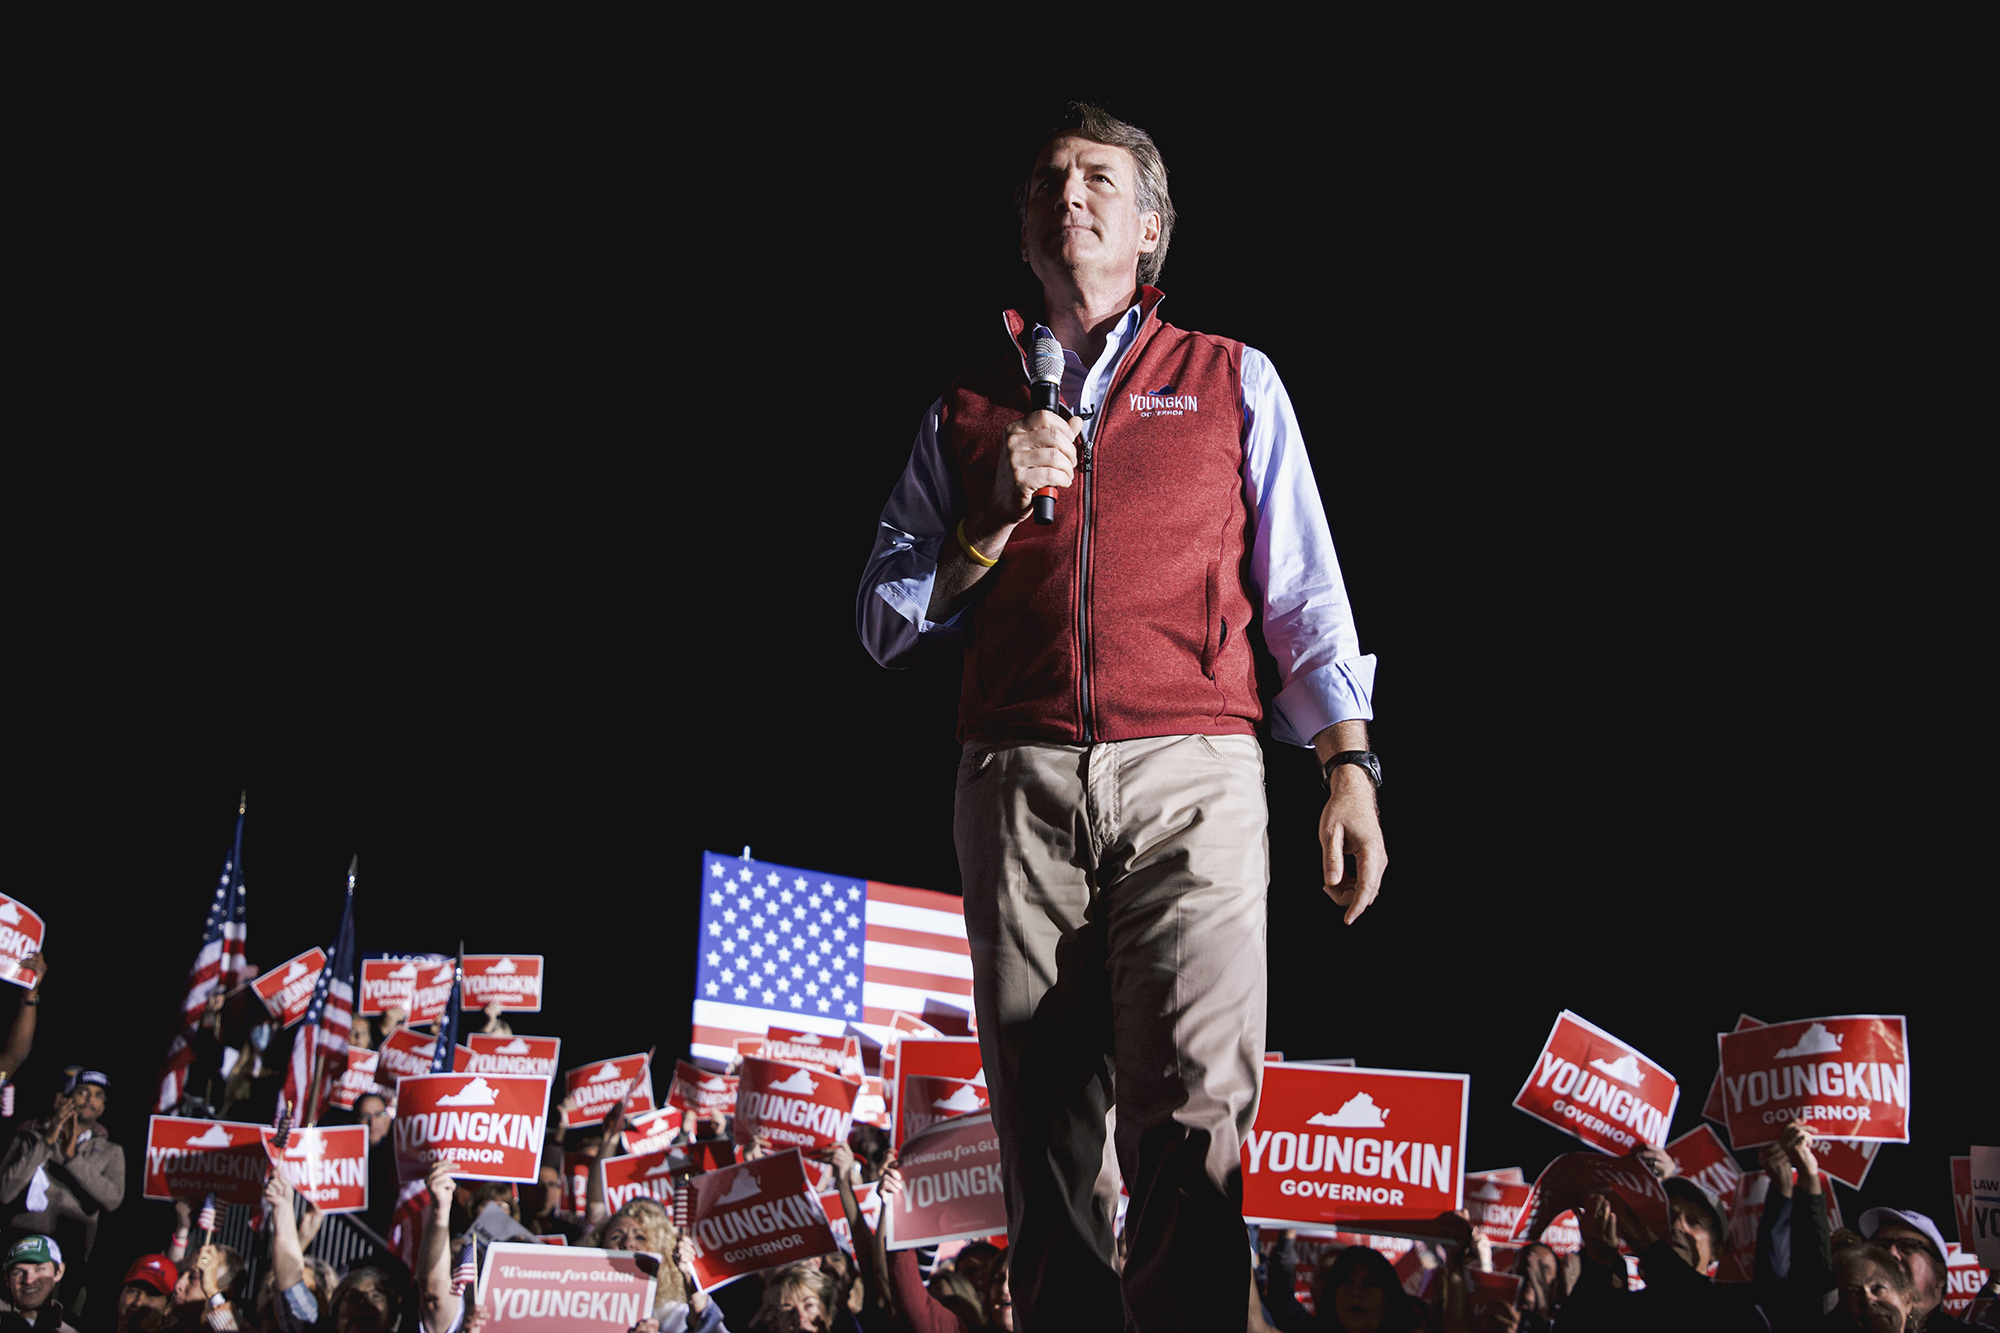 Governor Glenn Youngkin standing at a Rally surrounded by supporters holding red Youngkin for Governor signs